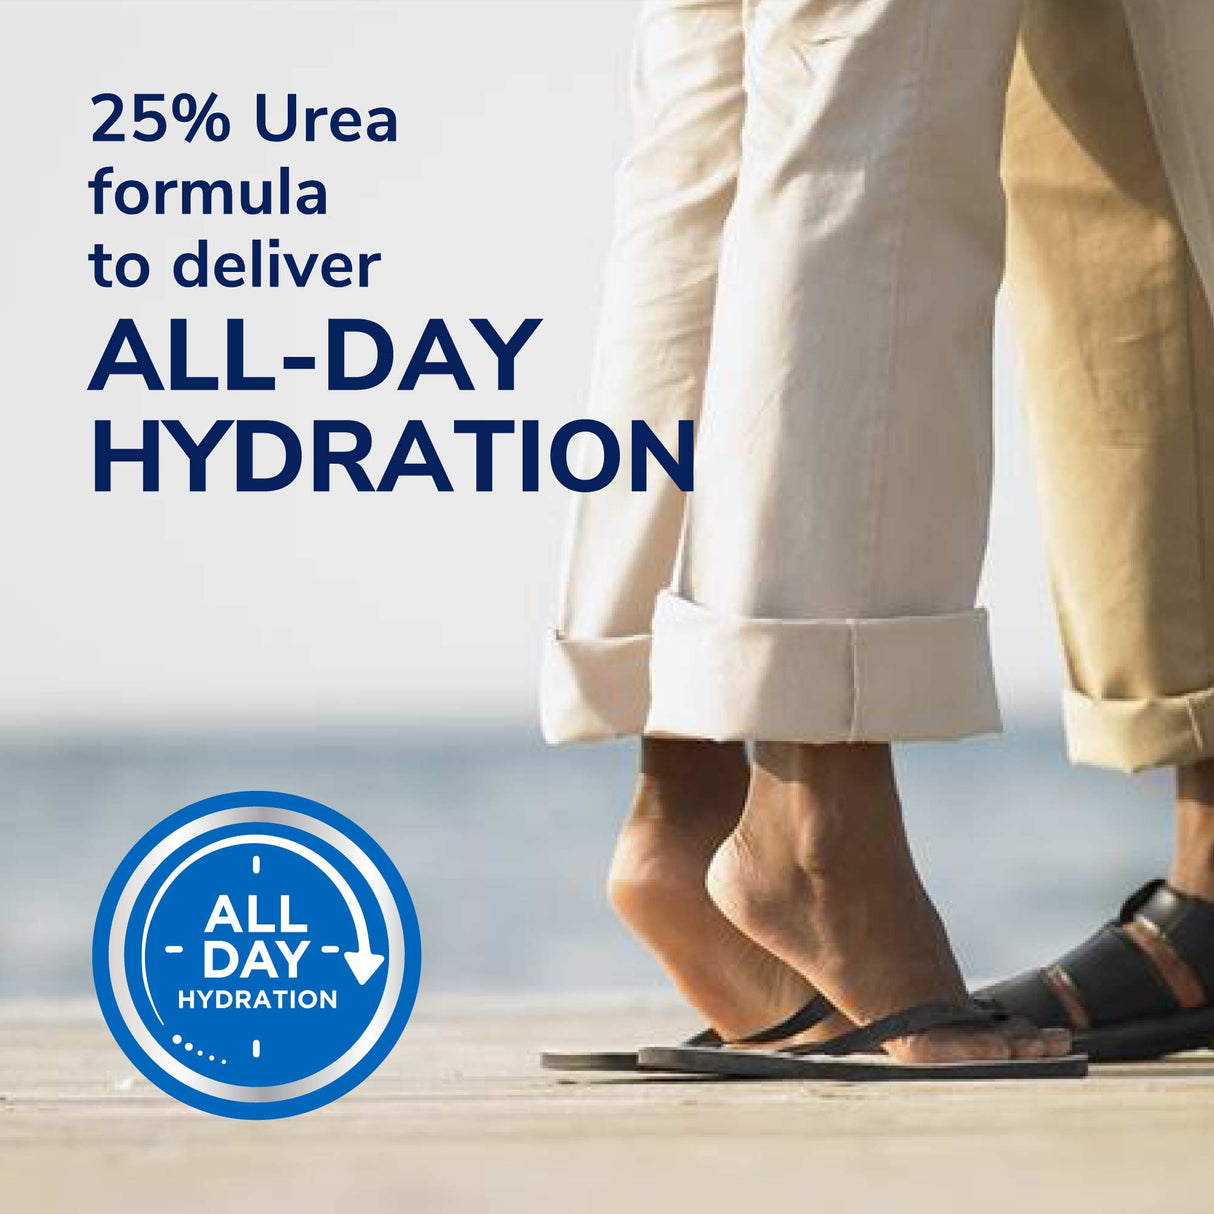 image of 25% urea formula to deliver all say hydration